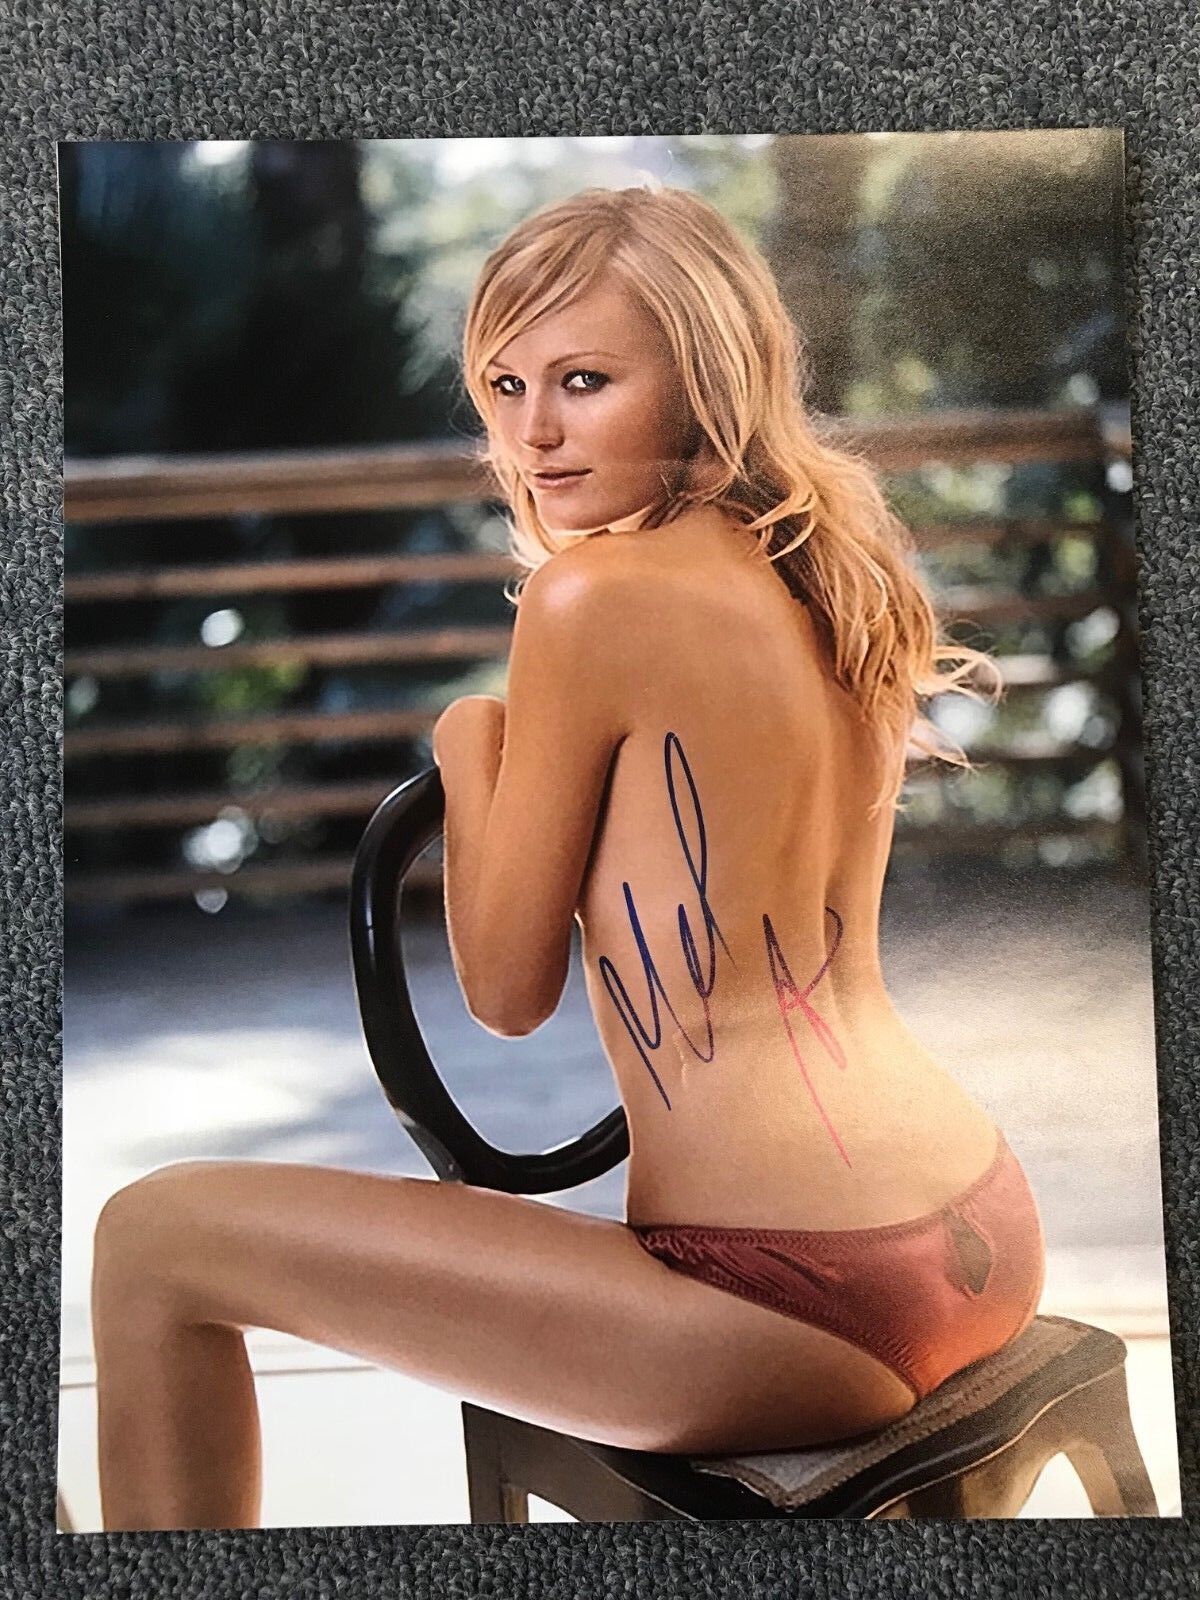 andy augustin recommends malin akerman hot pic